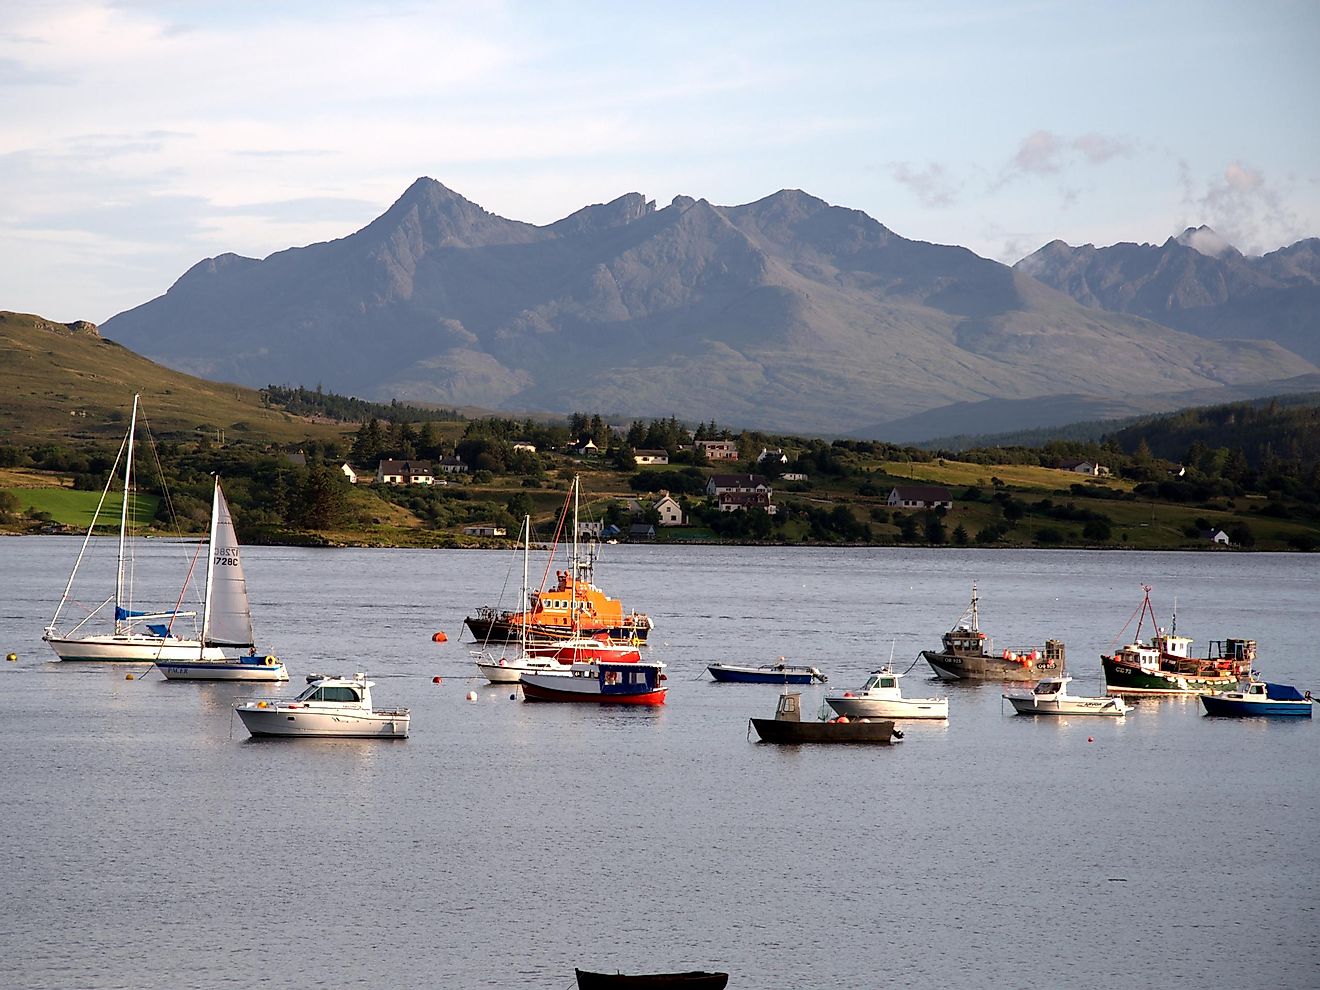 The North Cuillin ridge from Portree, the largest town in Skye, an island in the Inner Hebrides of Scotland.